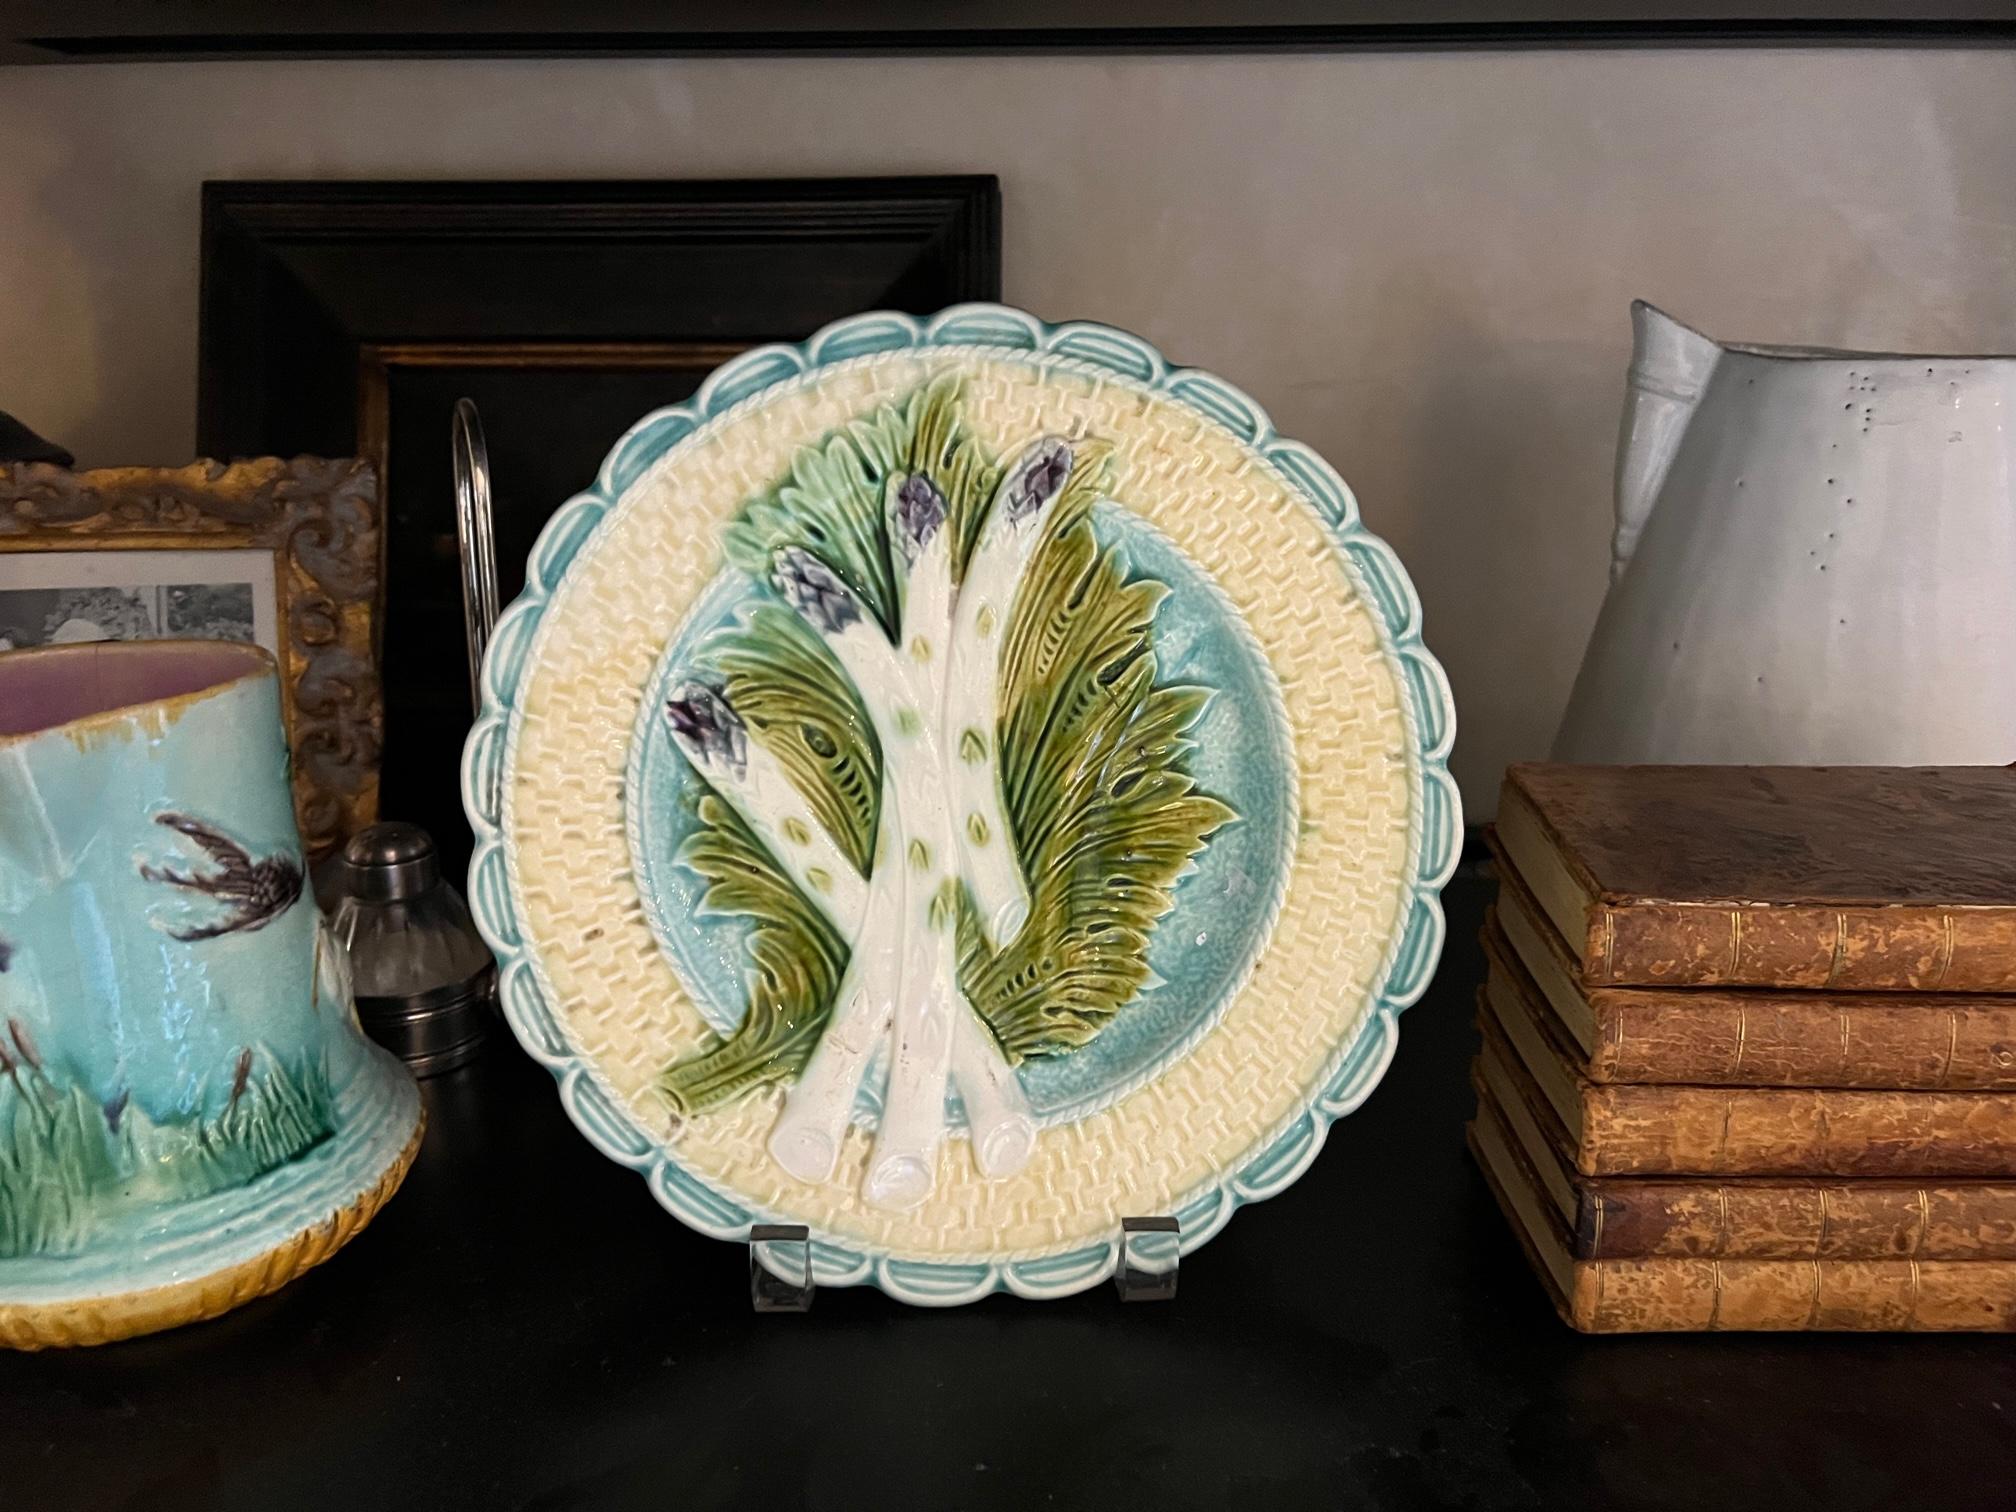 A French majolica asparagus plate from the Salins-les-Bains region of France, made in the late 19th century. The plate has four white asparagus with purple tips, laying on a bed of green leaves. The plate includes a sauce well and is numbered on the